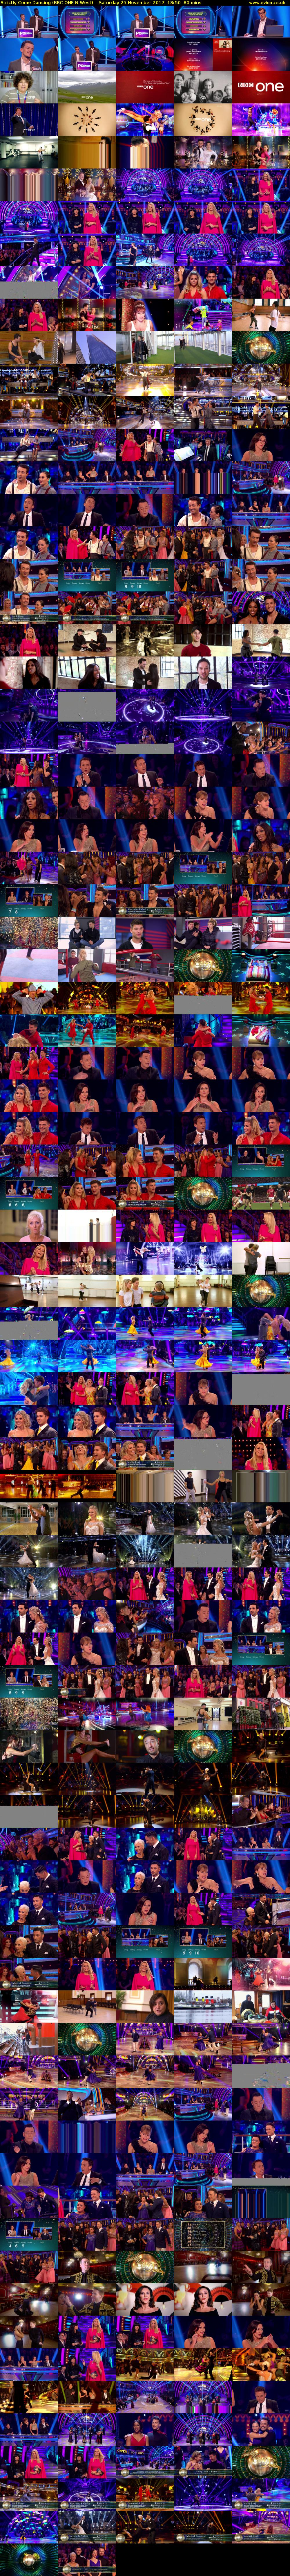 Strictly Come Dancing (BBC ONE N West) Saturday 25 November 2017 18:50 - 20:10